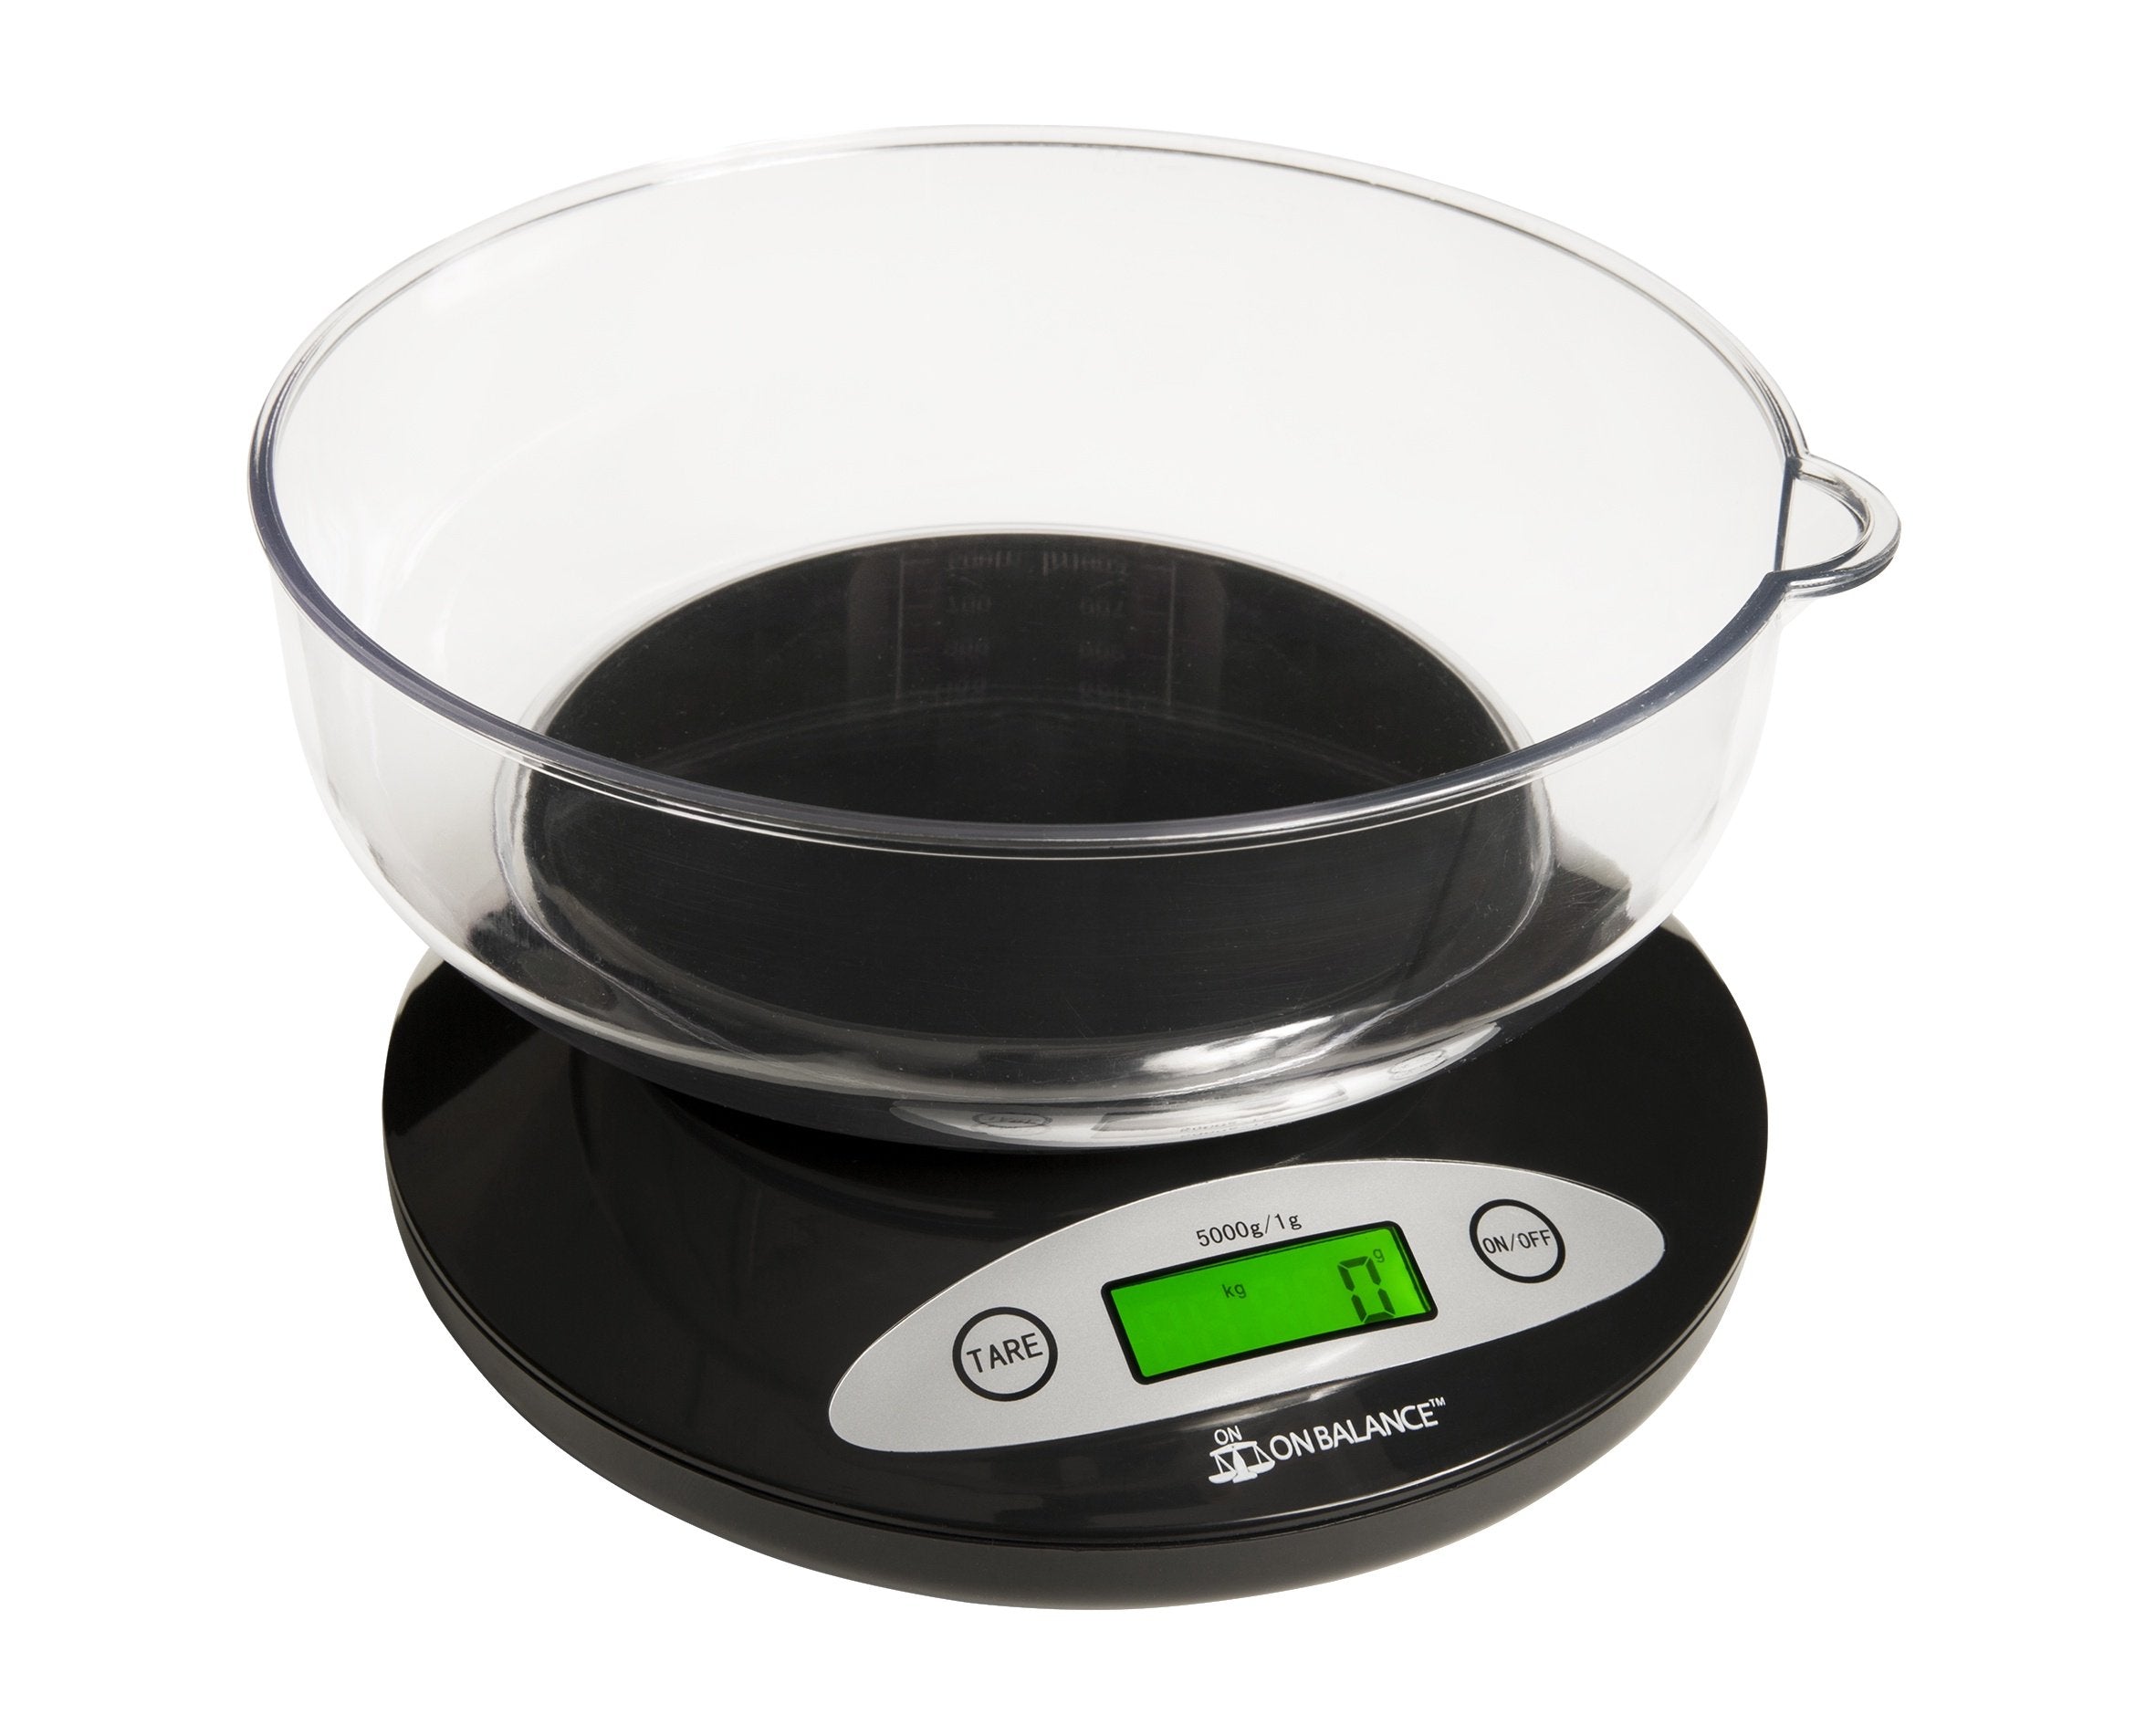 On Balance KB Kitchen Scale (5000g x 1g) with 190mm Diameter Bowl